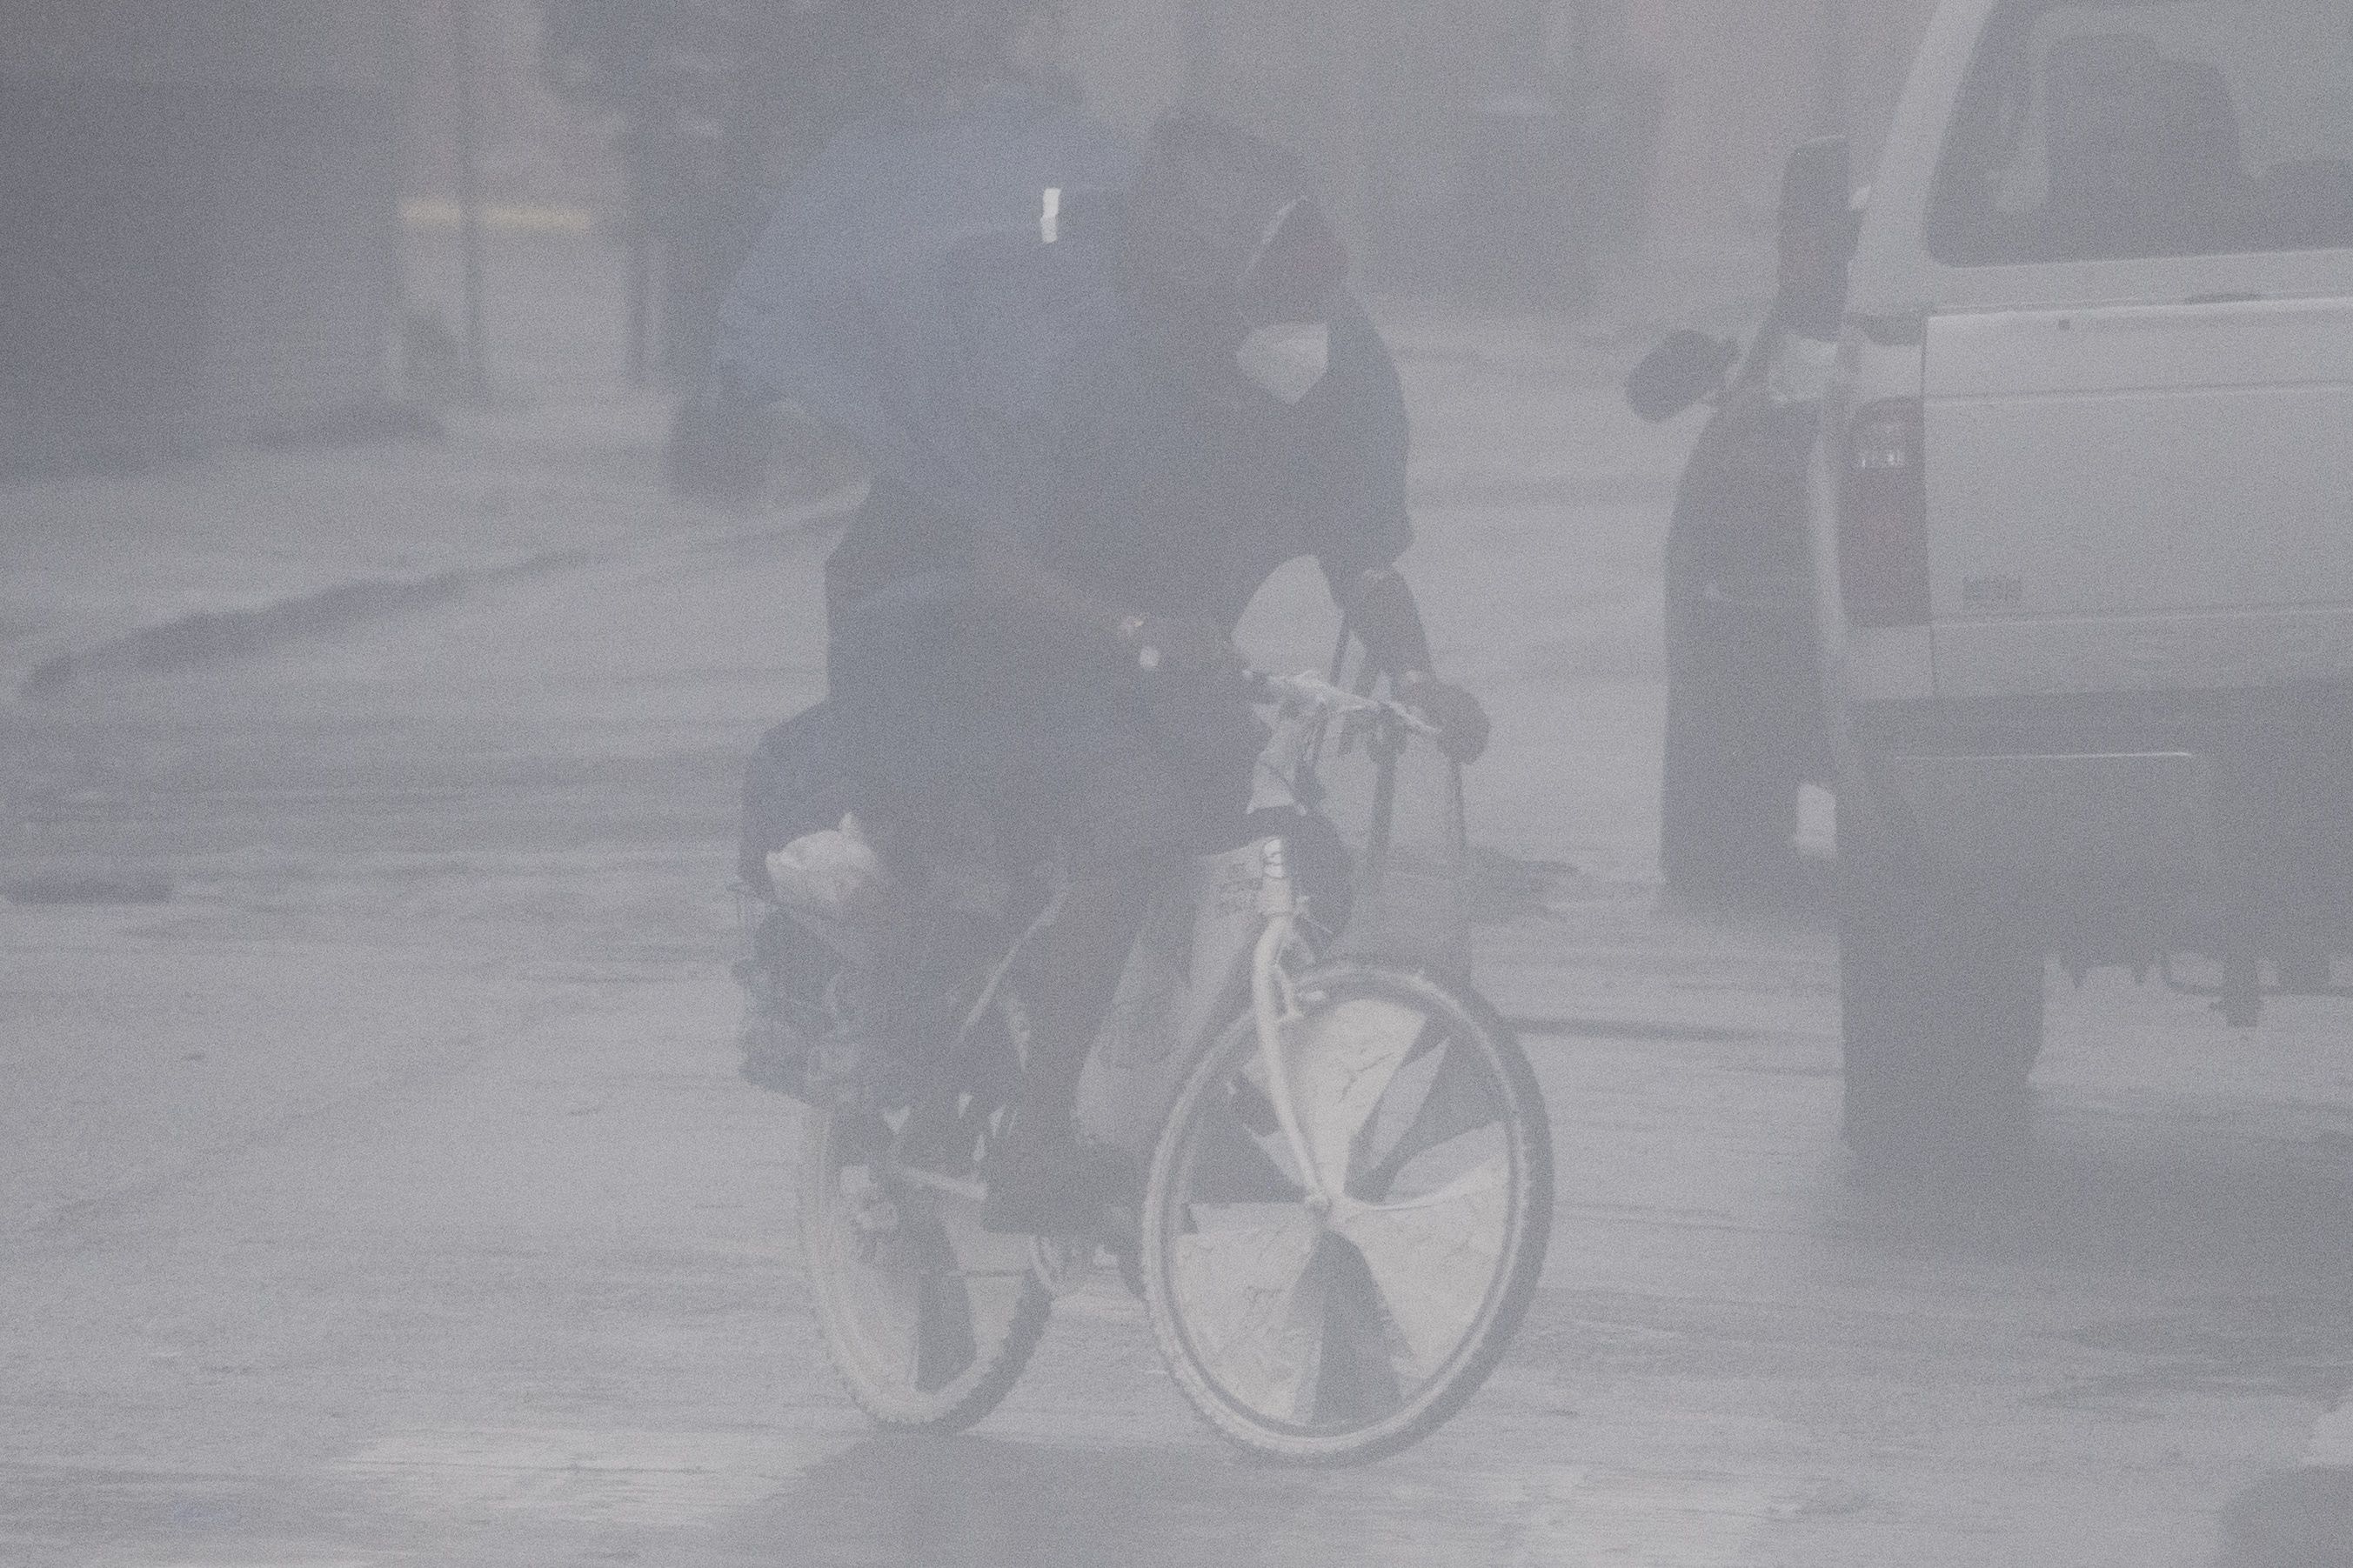 A cyclist wears a face mask as they ride through rain and high winds on Canal Street in New Orleans, Louisiana on August 29